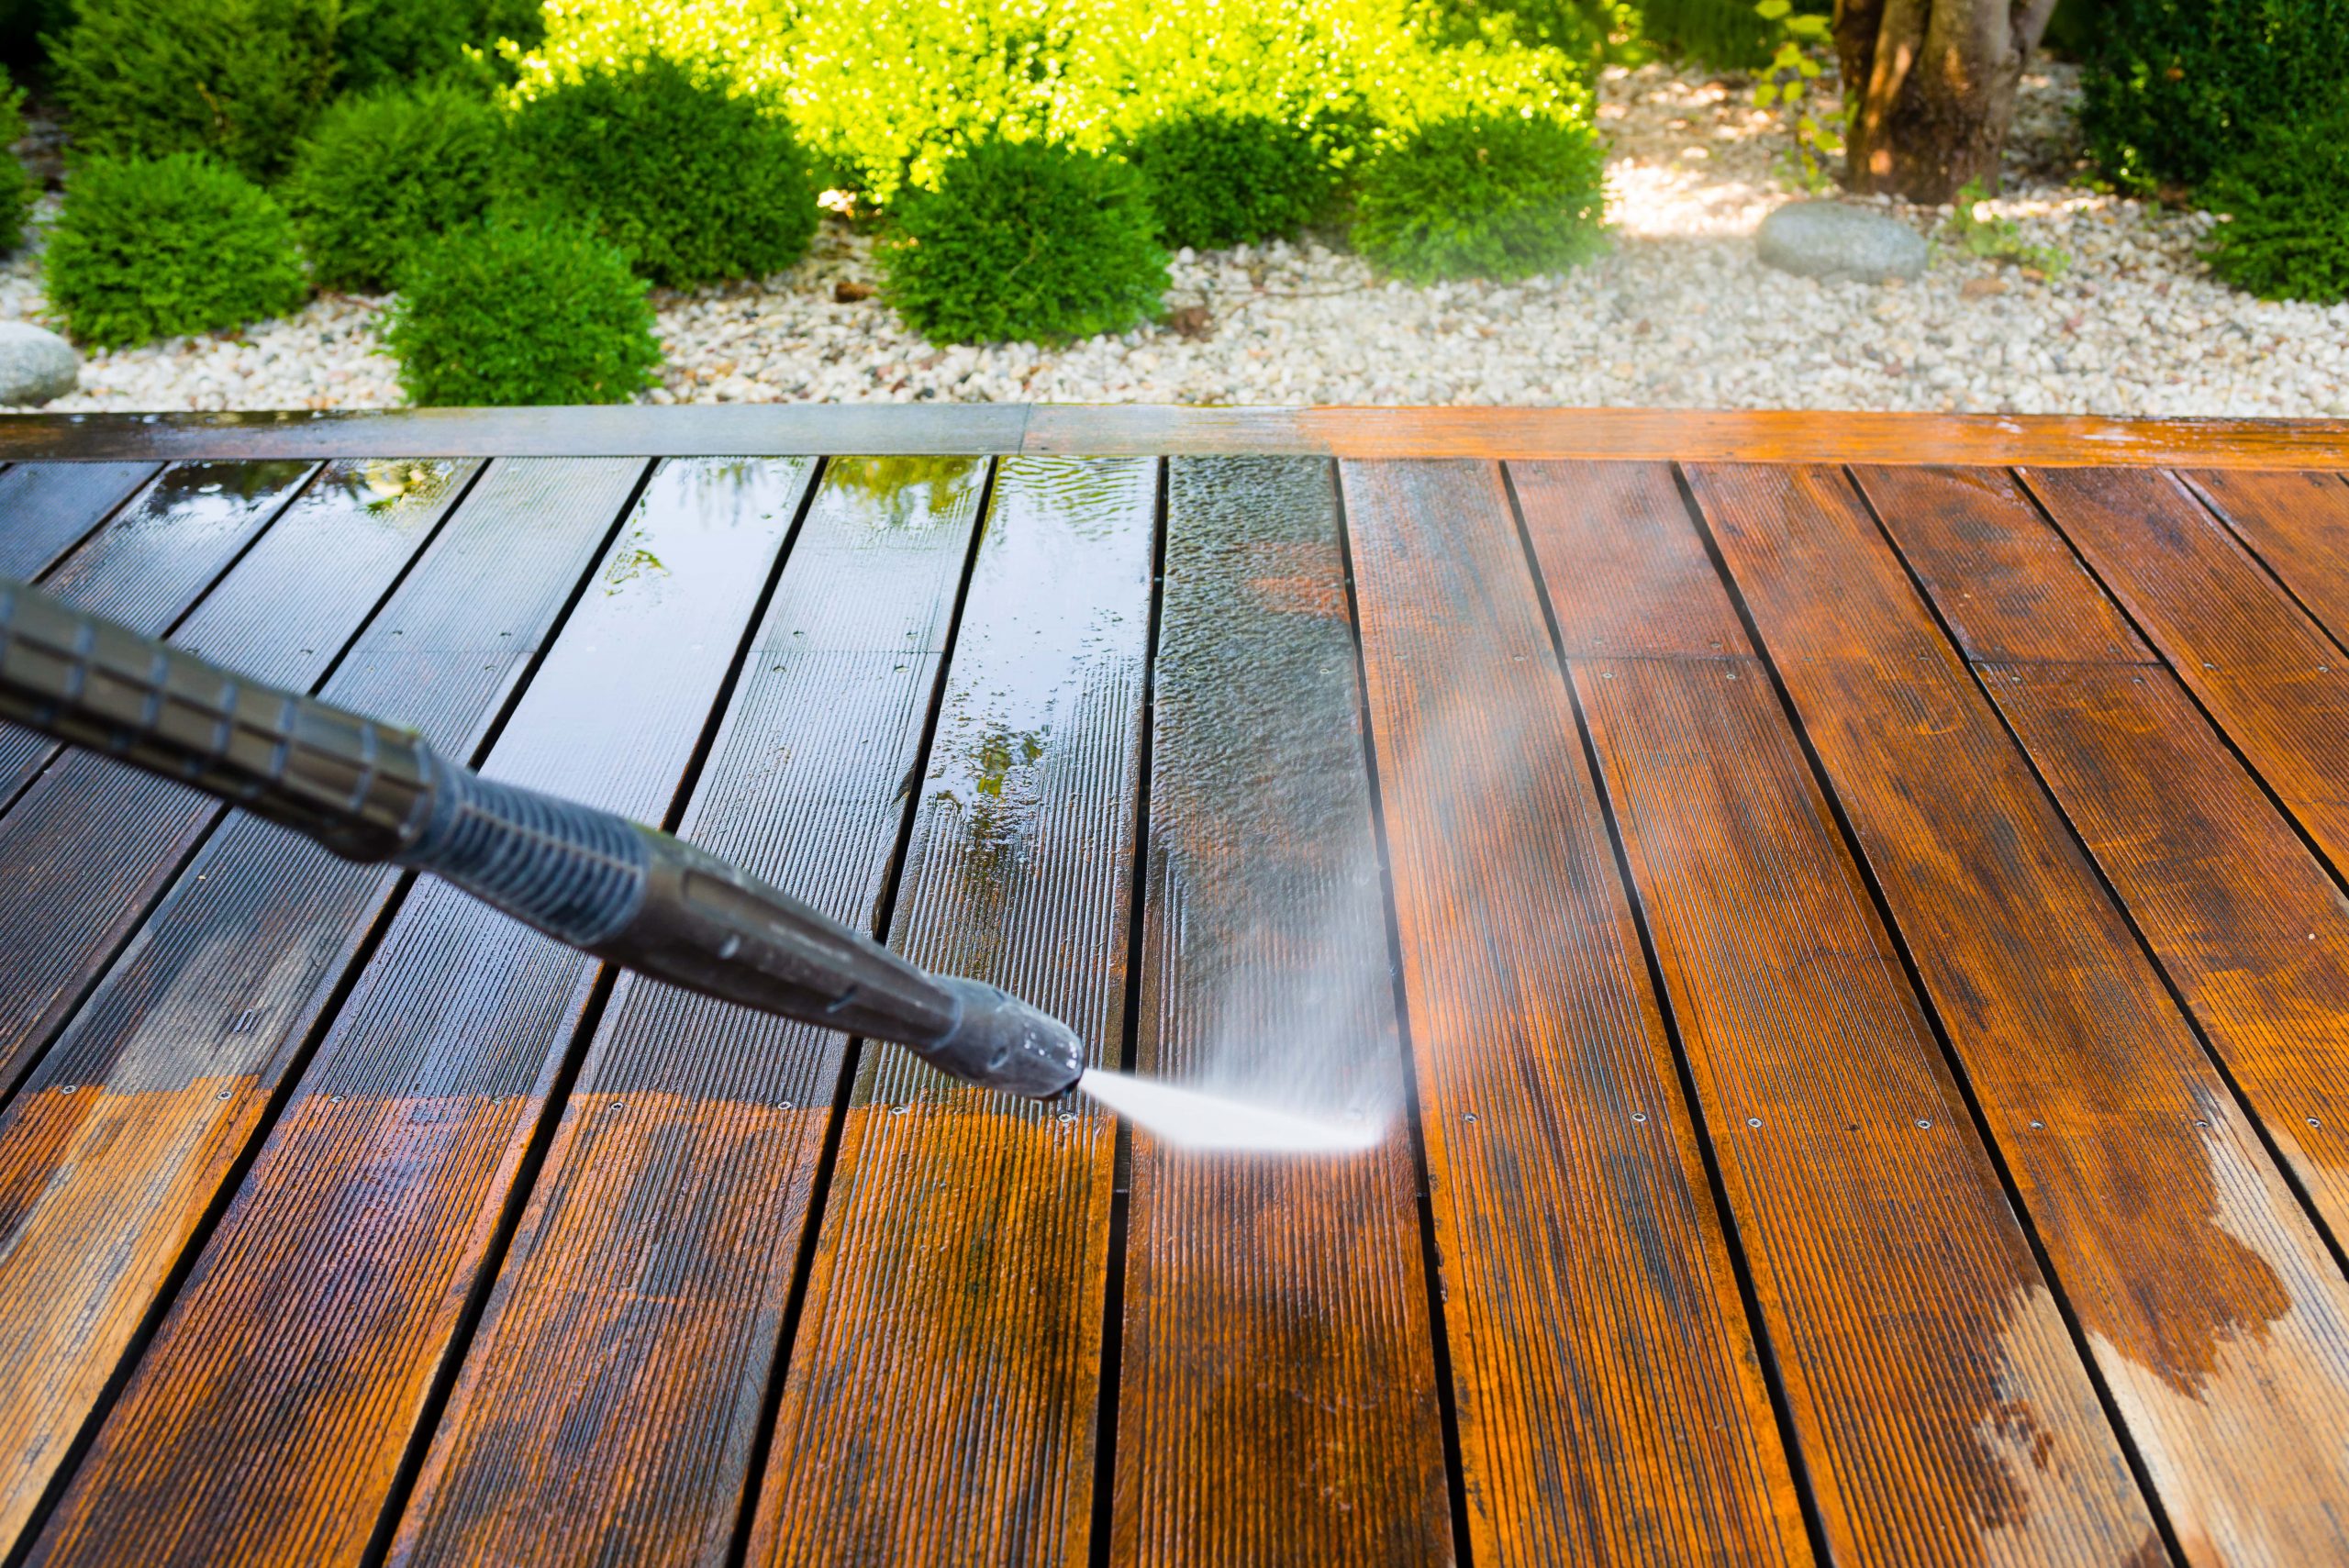 Garden Pressure Cleaning Company Dulwich SE21